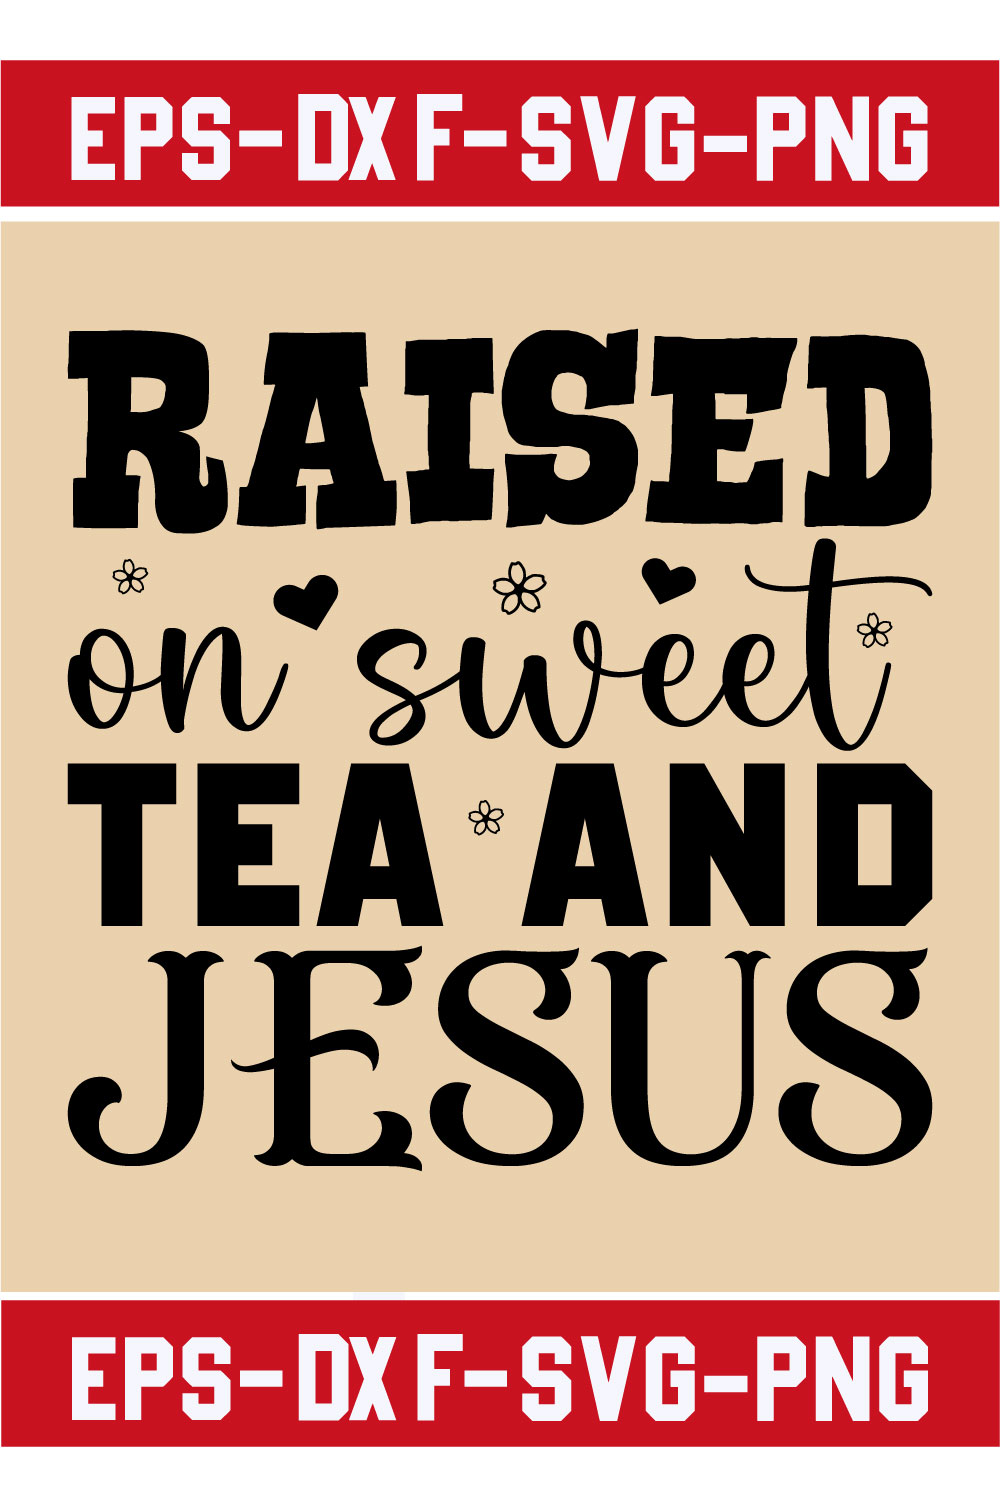 Raised on sweet tea and Jesus pinterest preview image.